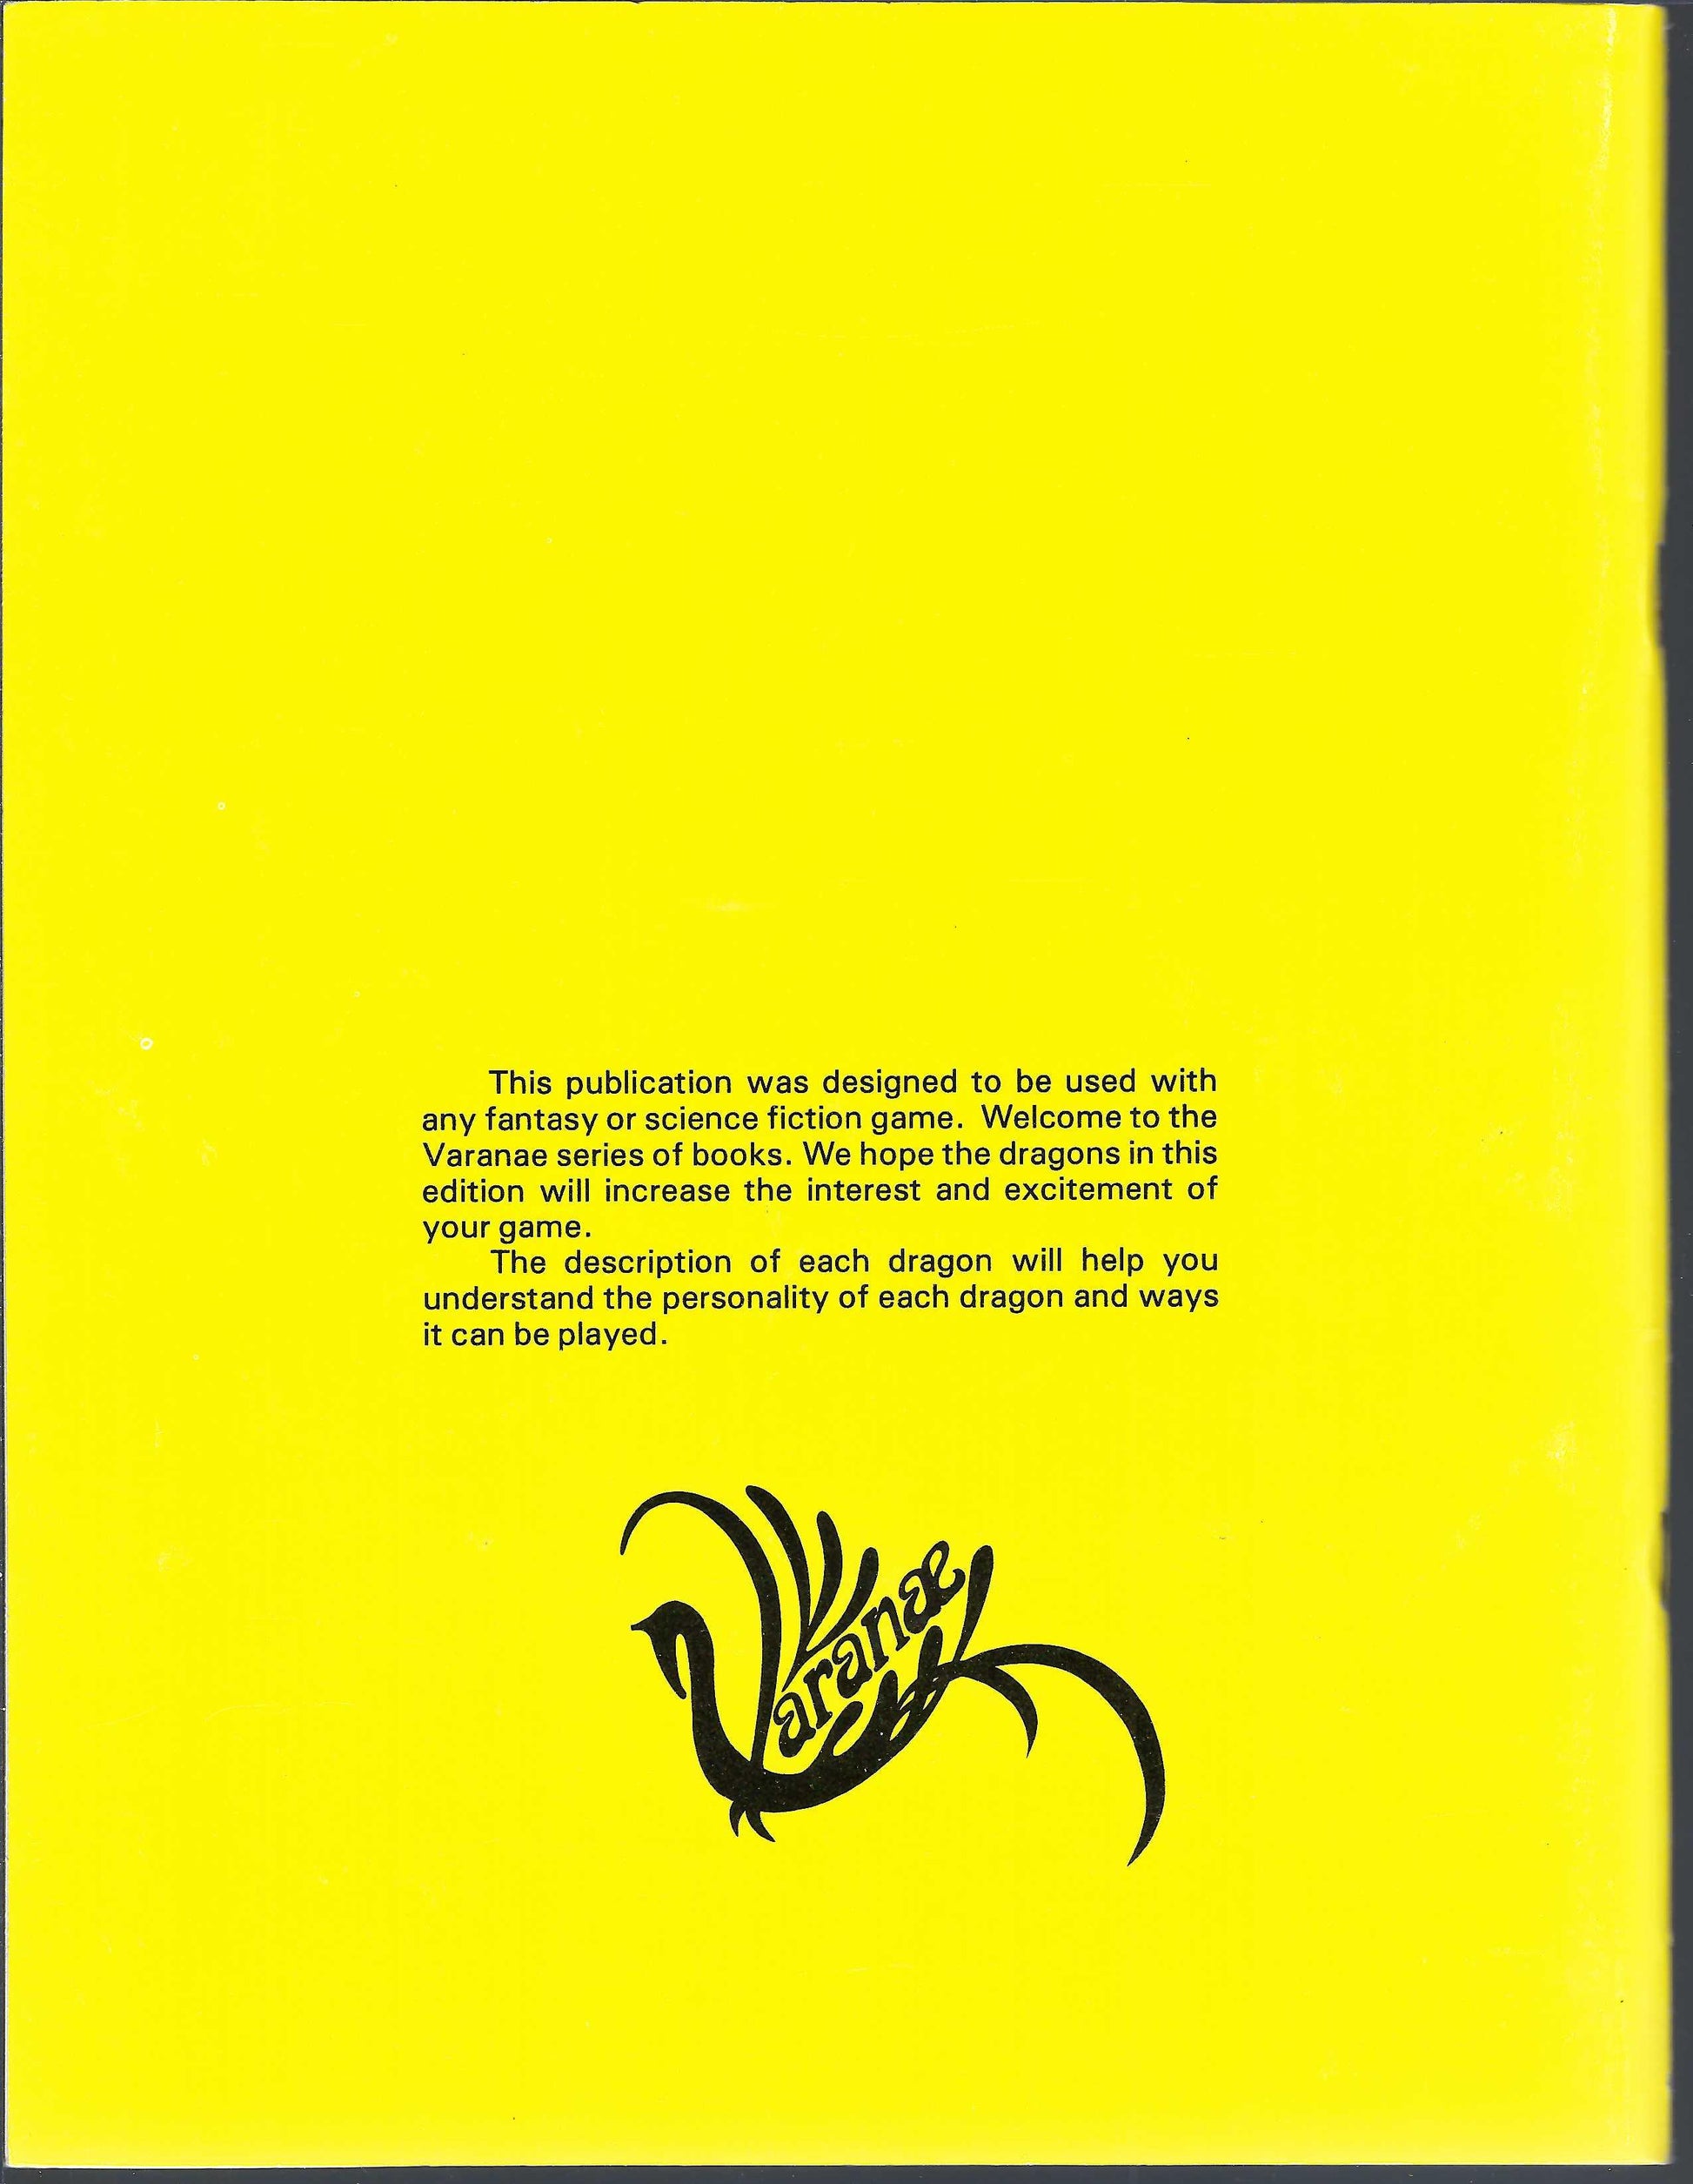 Dragons back cover of book